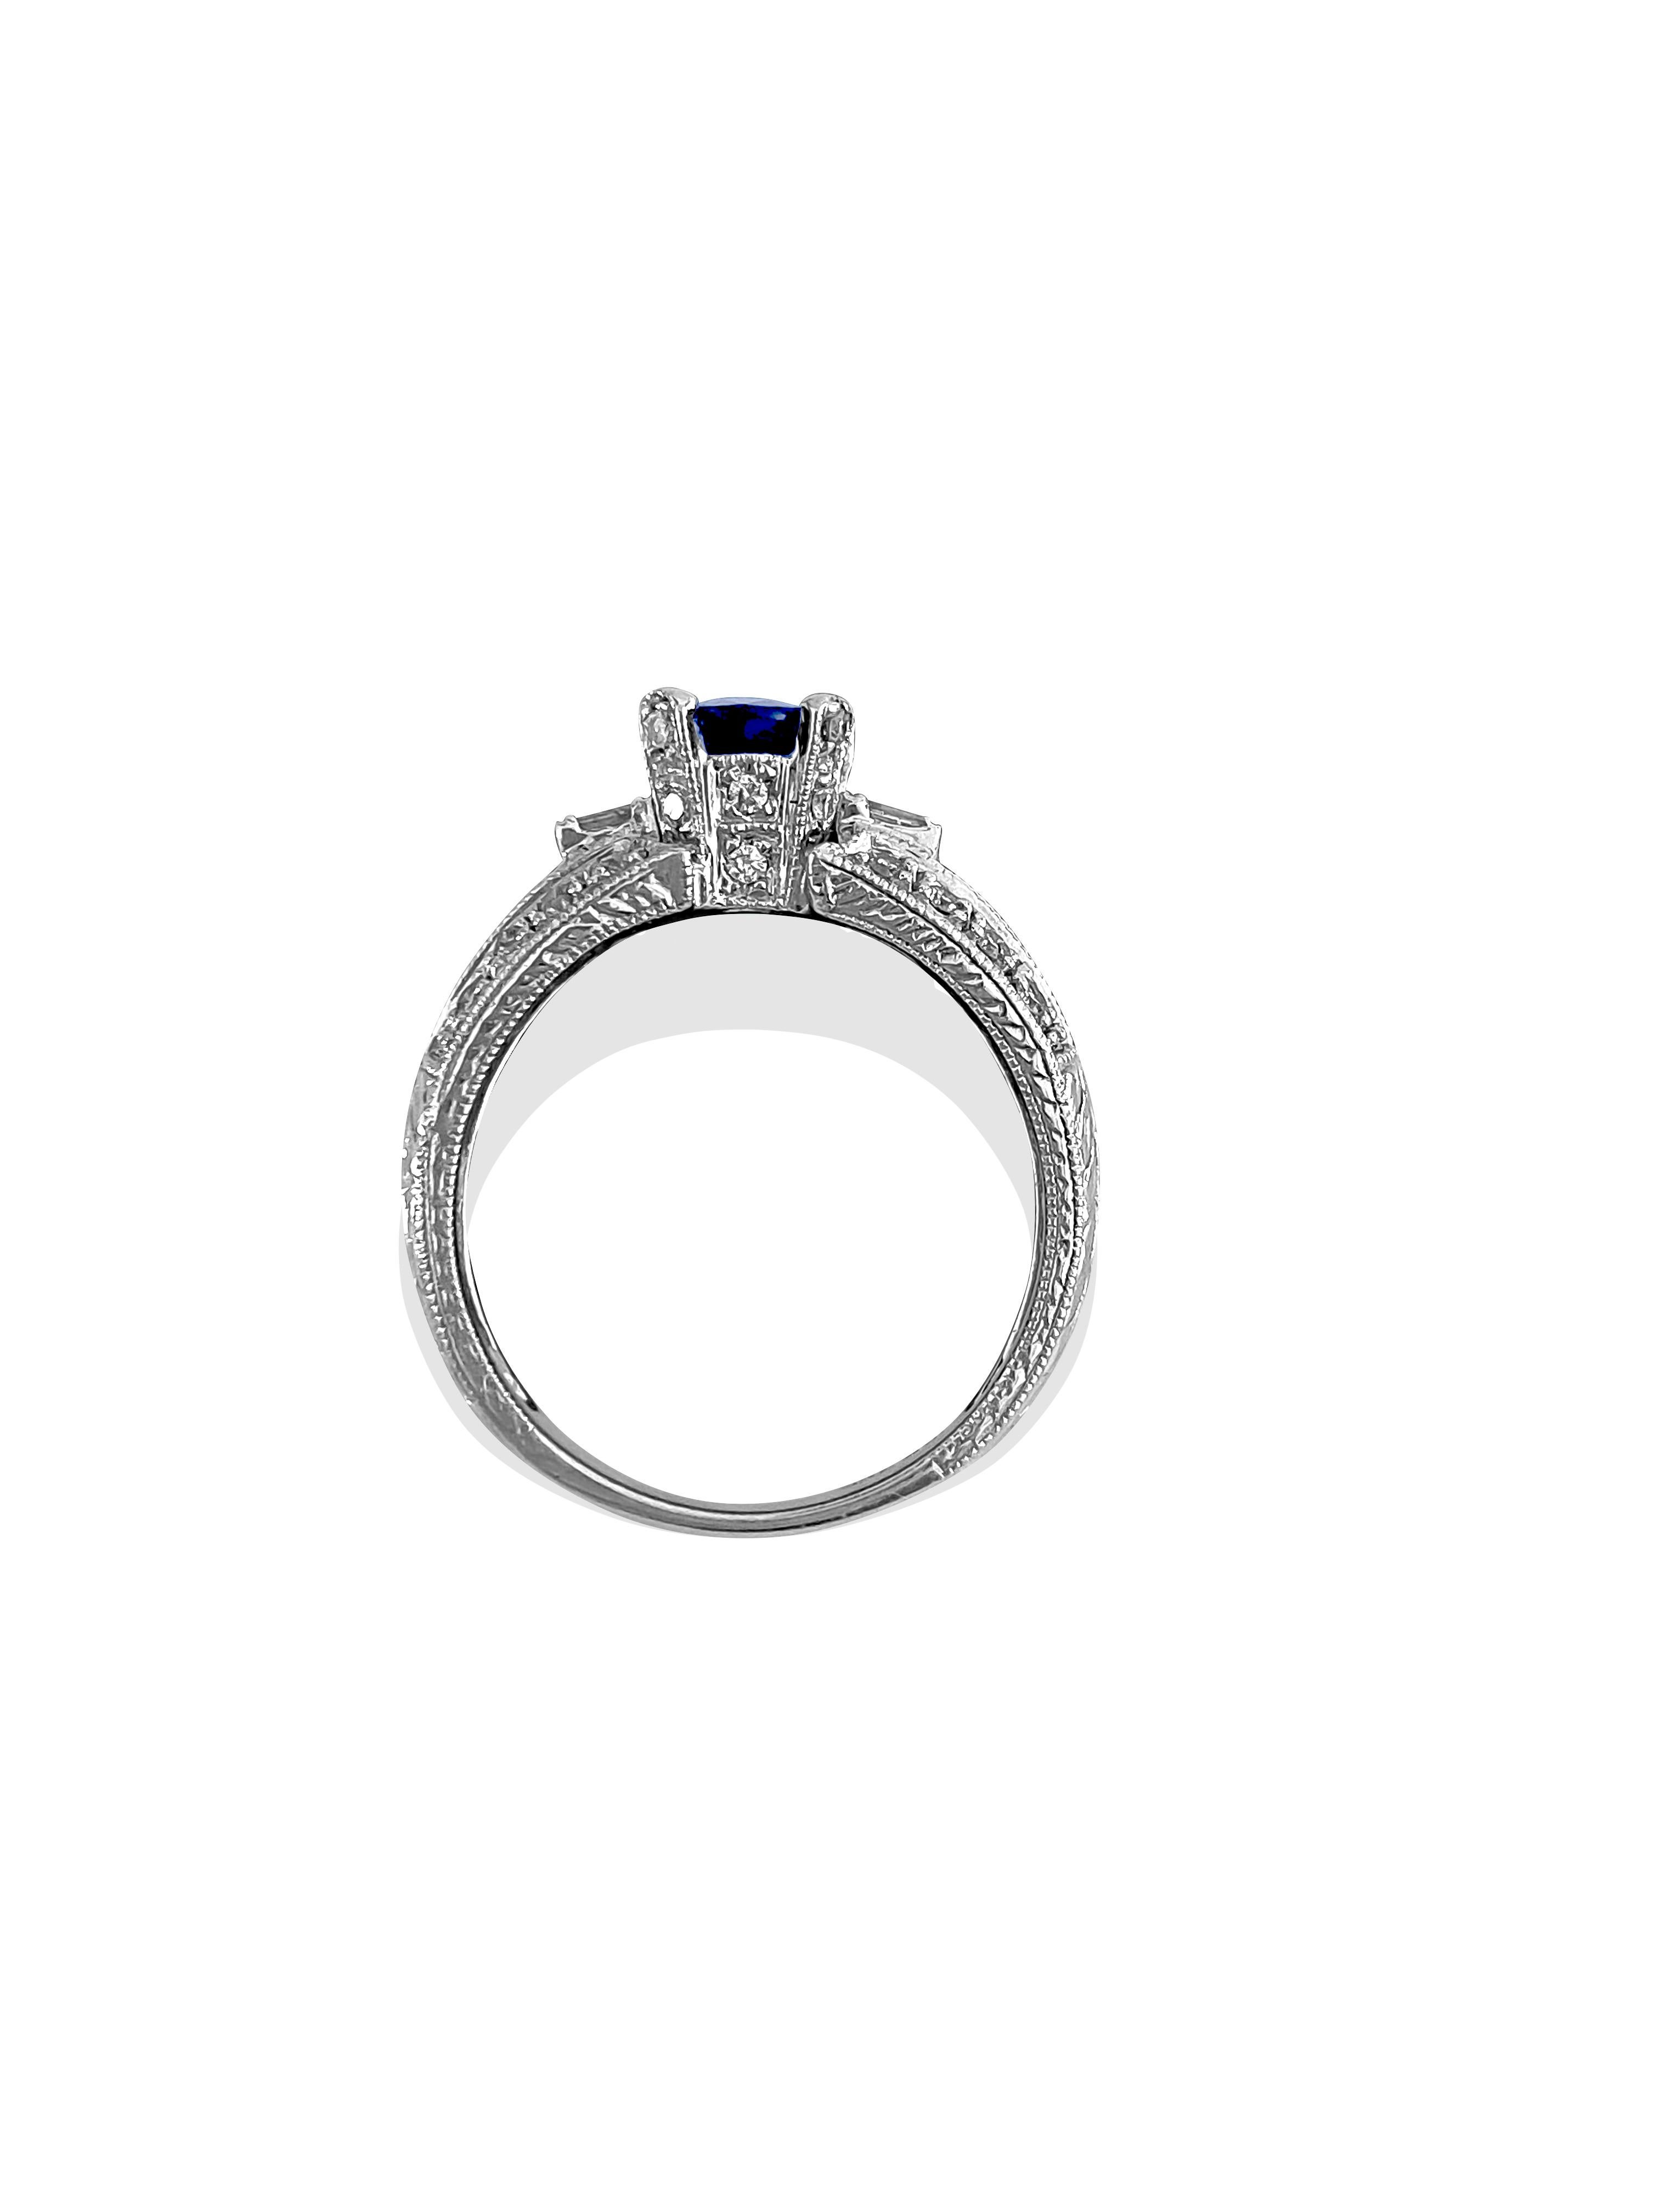 Vintage 1.50 Carat Natural Blue Sapphire Diamond Ring In Excellent Condition For Sale In Miami, FL